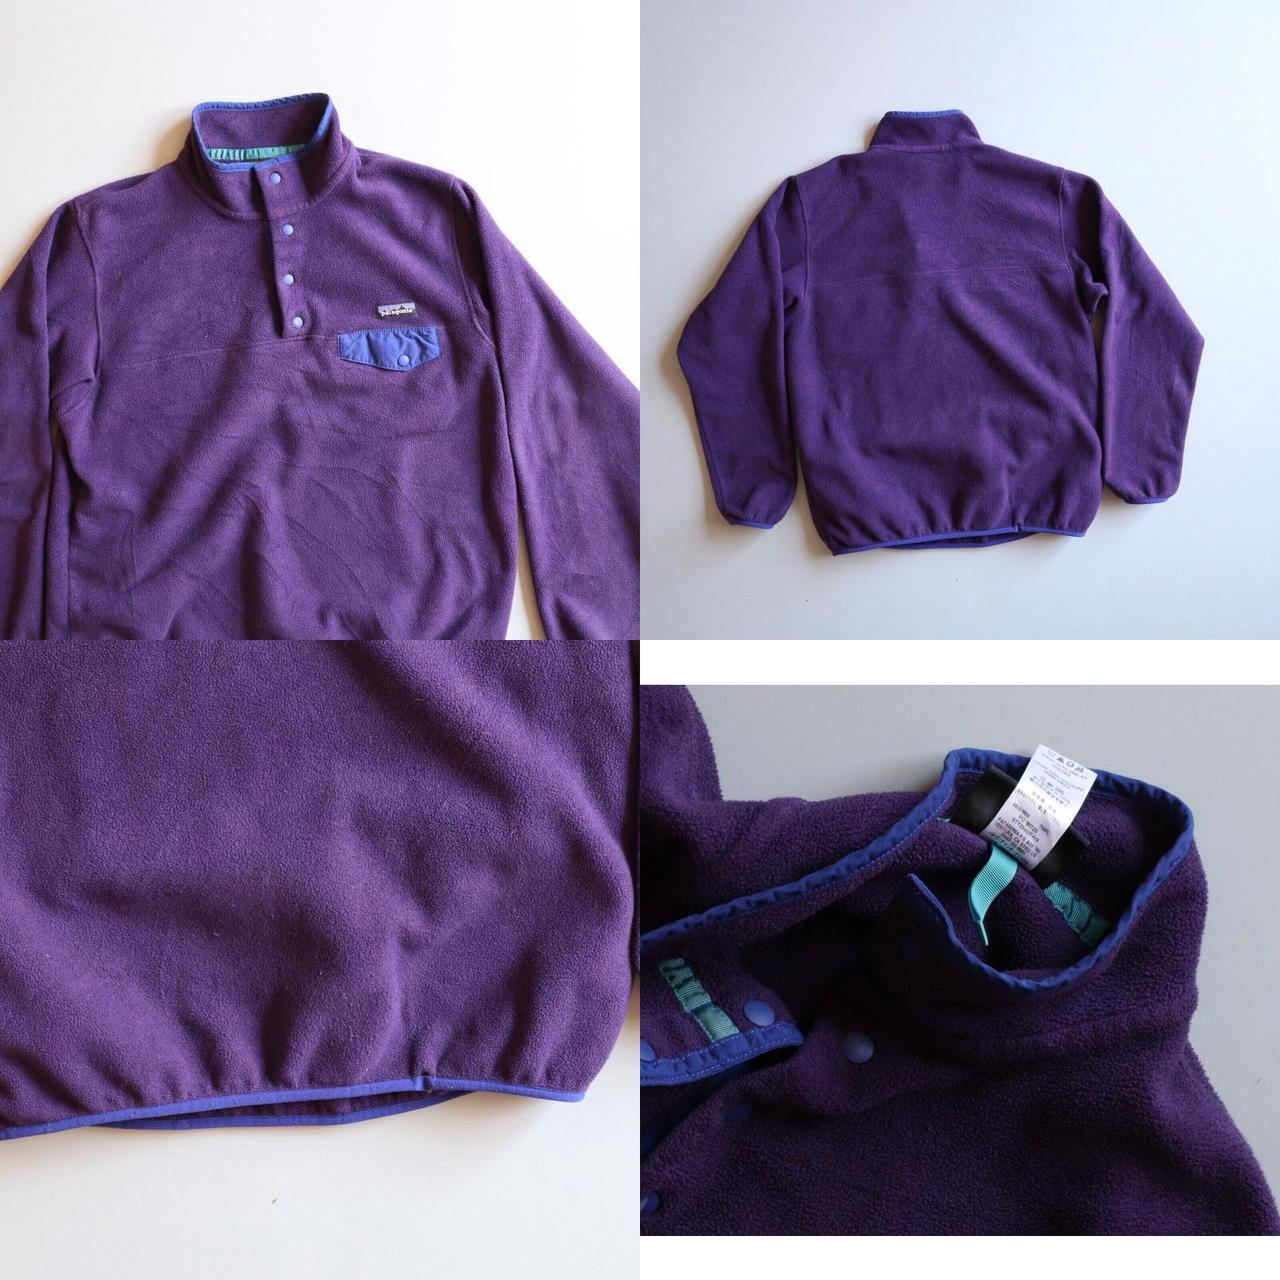 Patagonia Women's Purple and Blue Jacket (4)